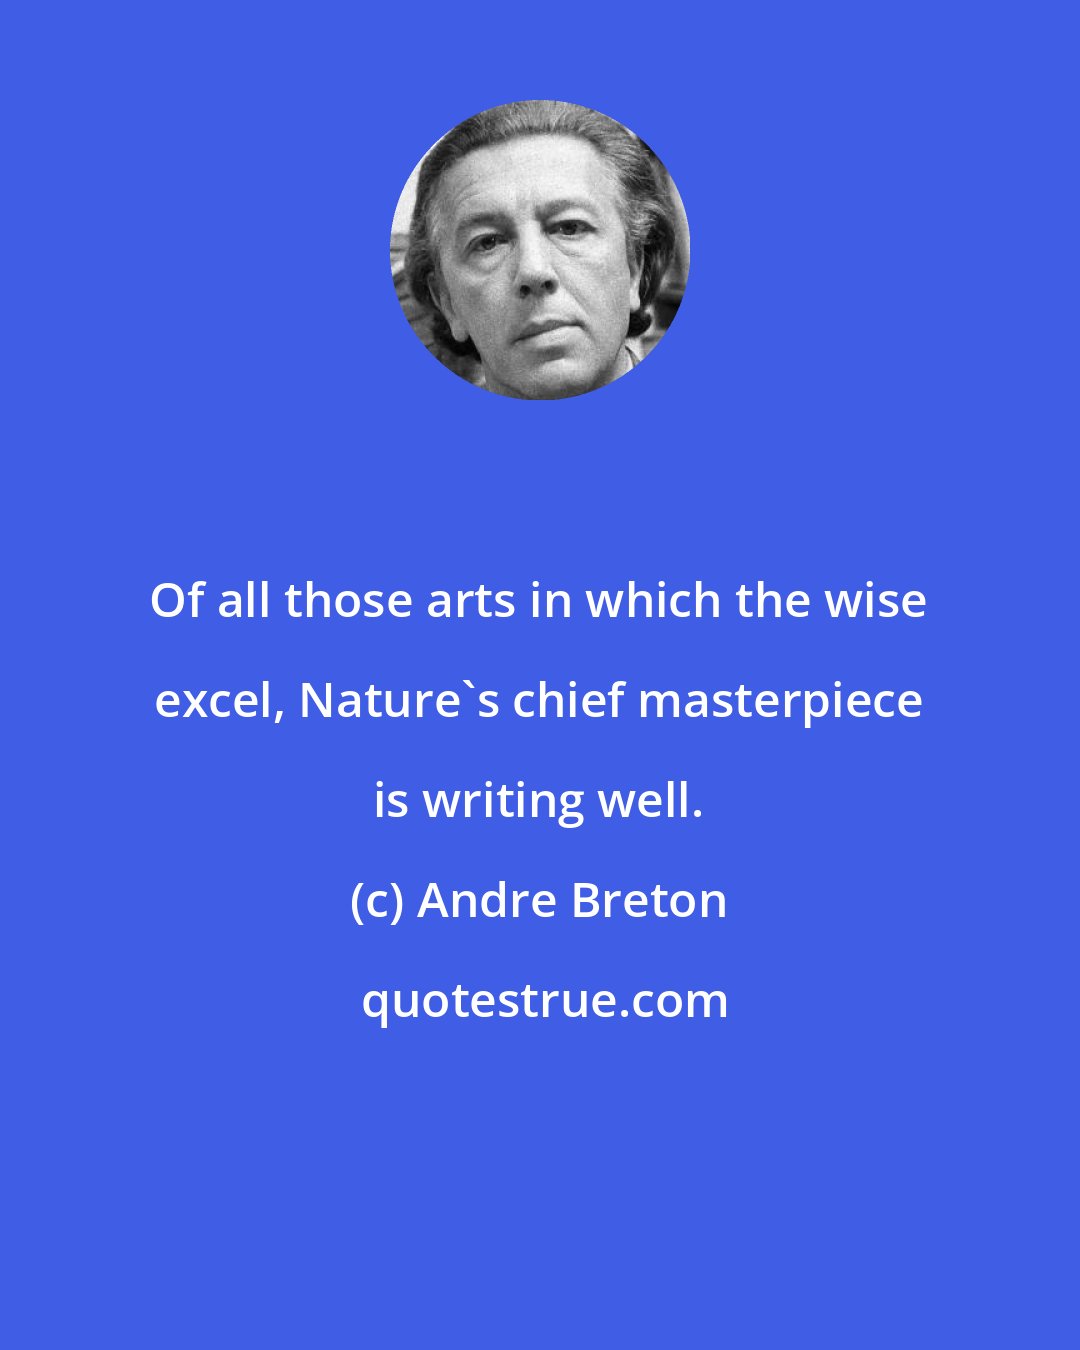 Andre Breton: Of all those arts in which the wise excel, Nature's chief masterpiece is writing well.